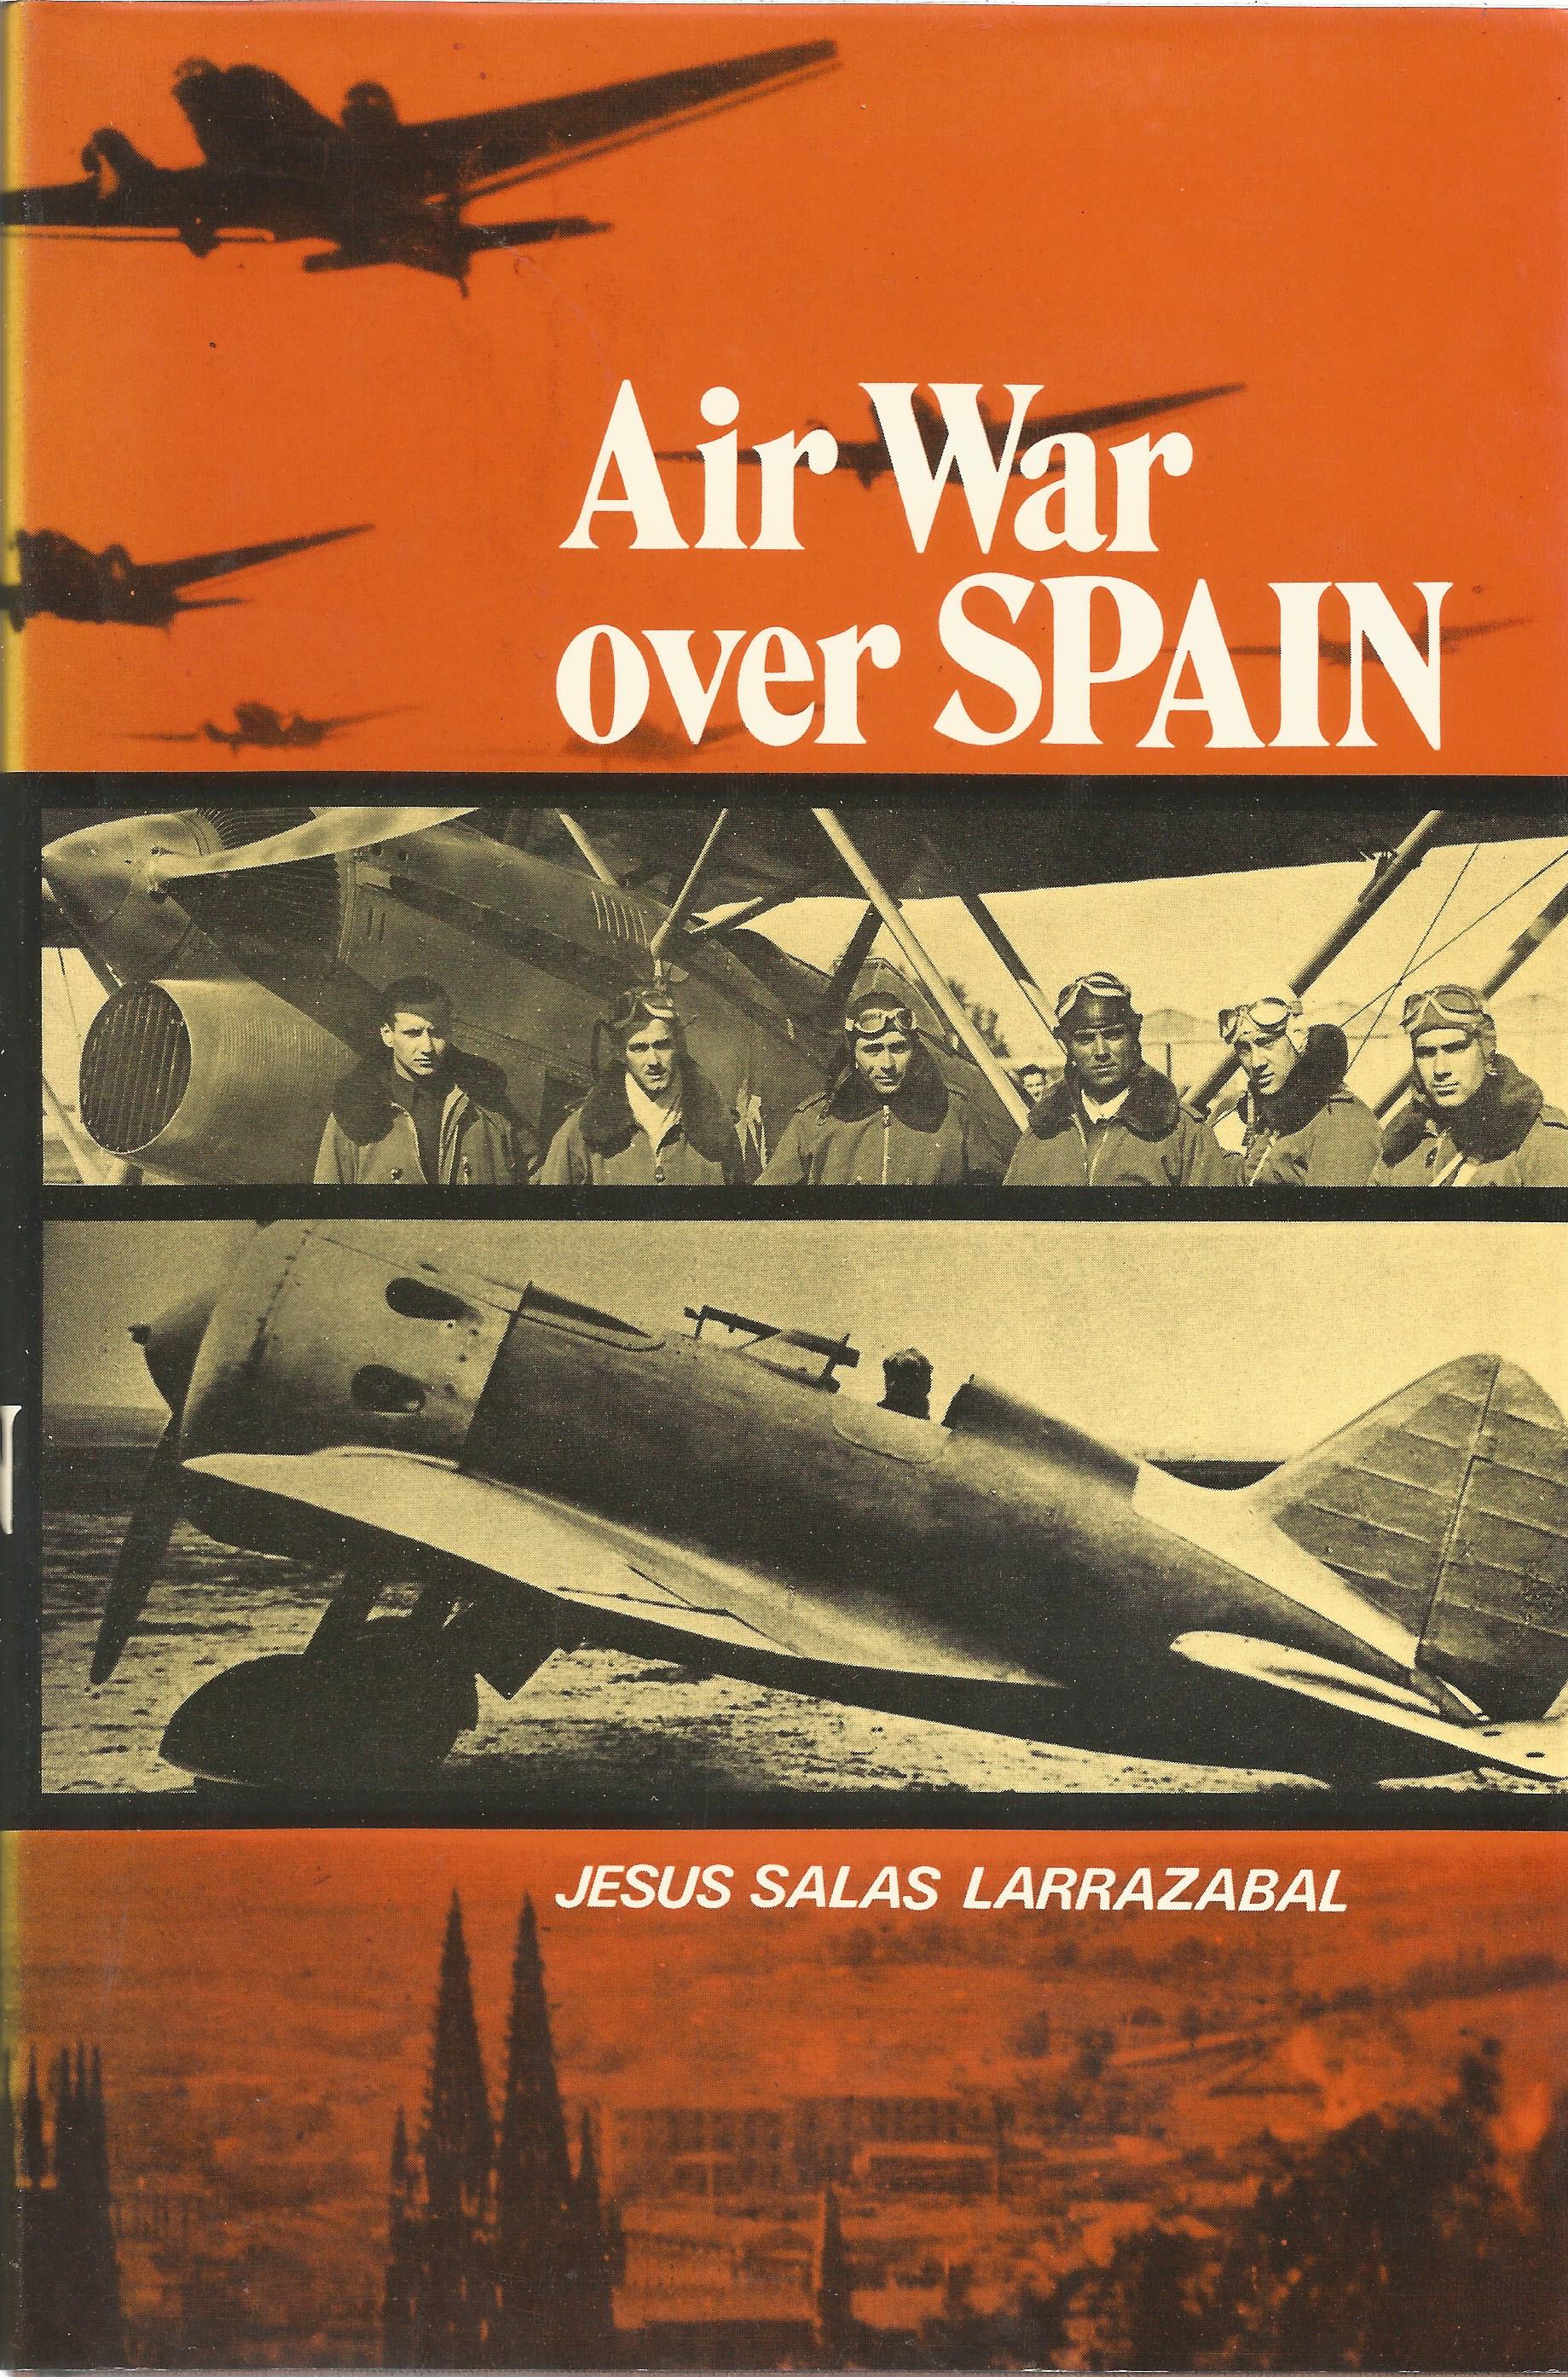 World War Two book titled Air War over Spain by the author Jesus Salas Larrazabal. Good condition